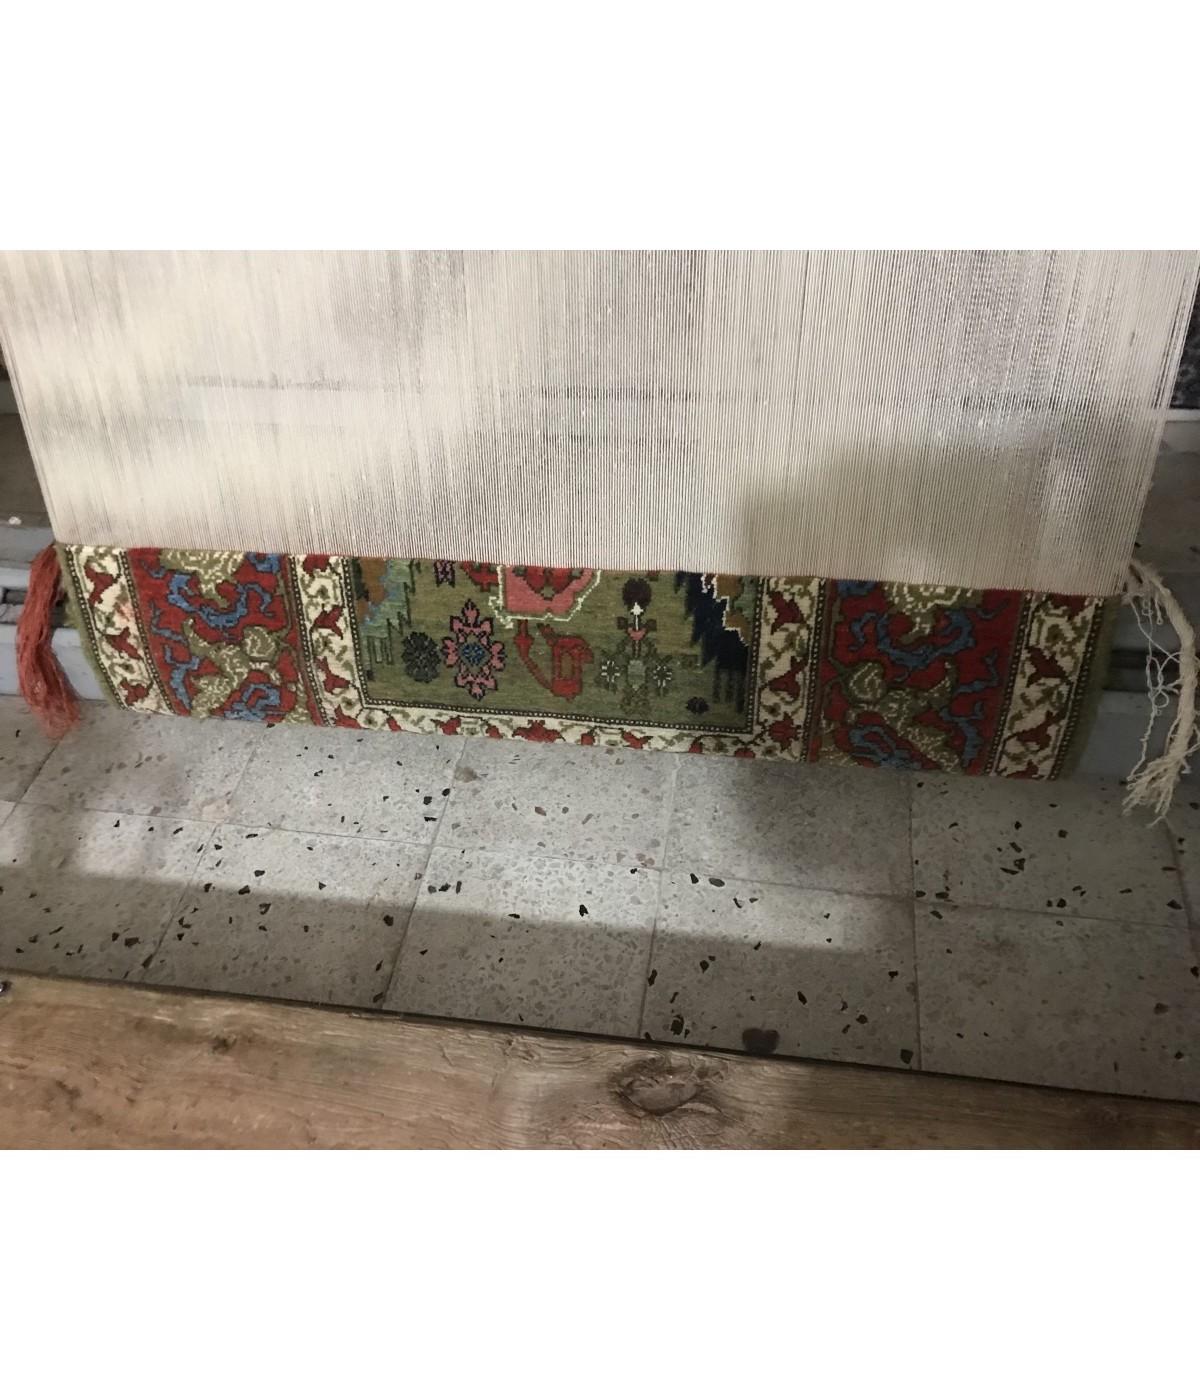 Ararat Rugs Palmettes and Flowers Lattice Rug Bidjar Revival Carpet Natural Dyed In New Condition For Sale In Tokyo, JP